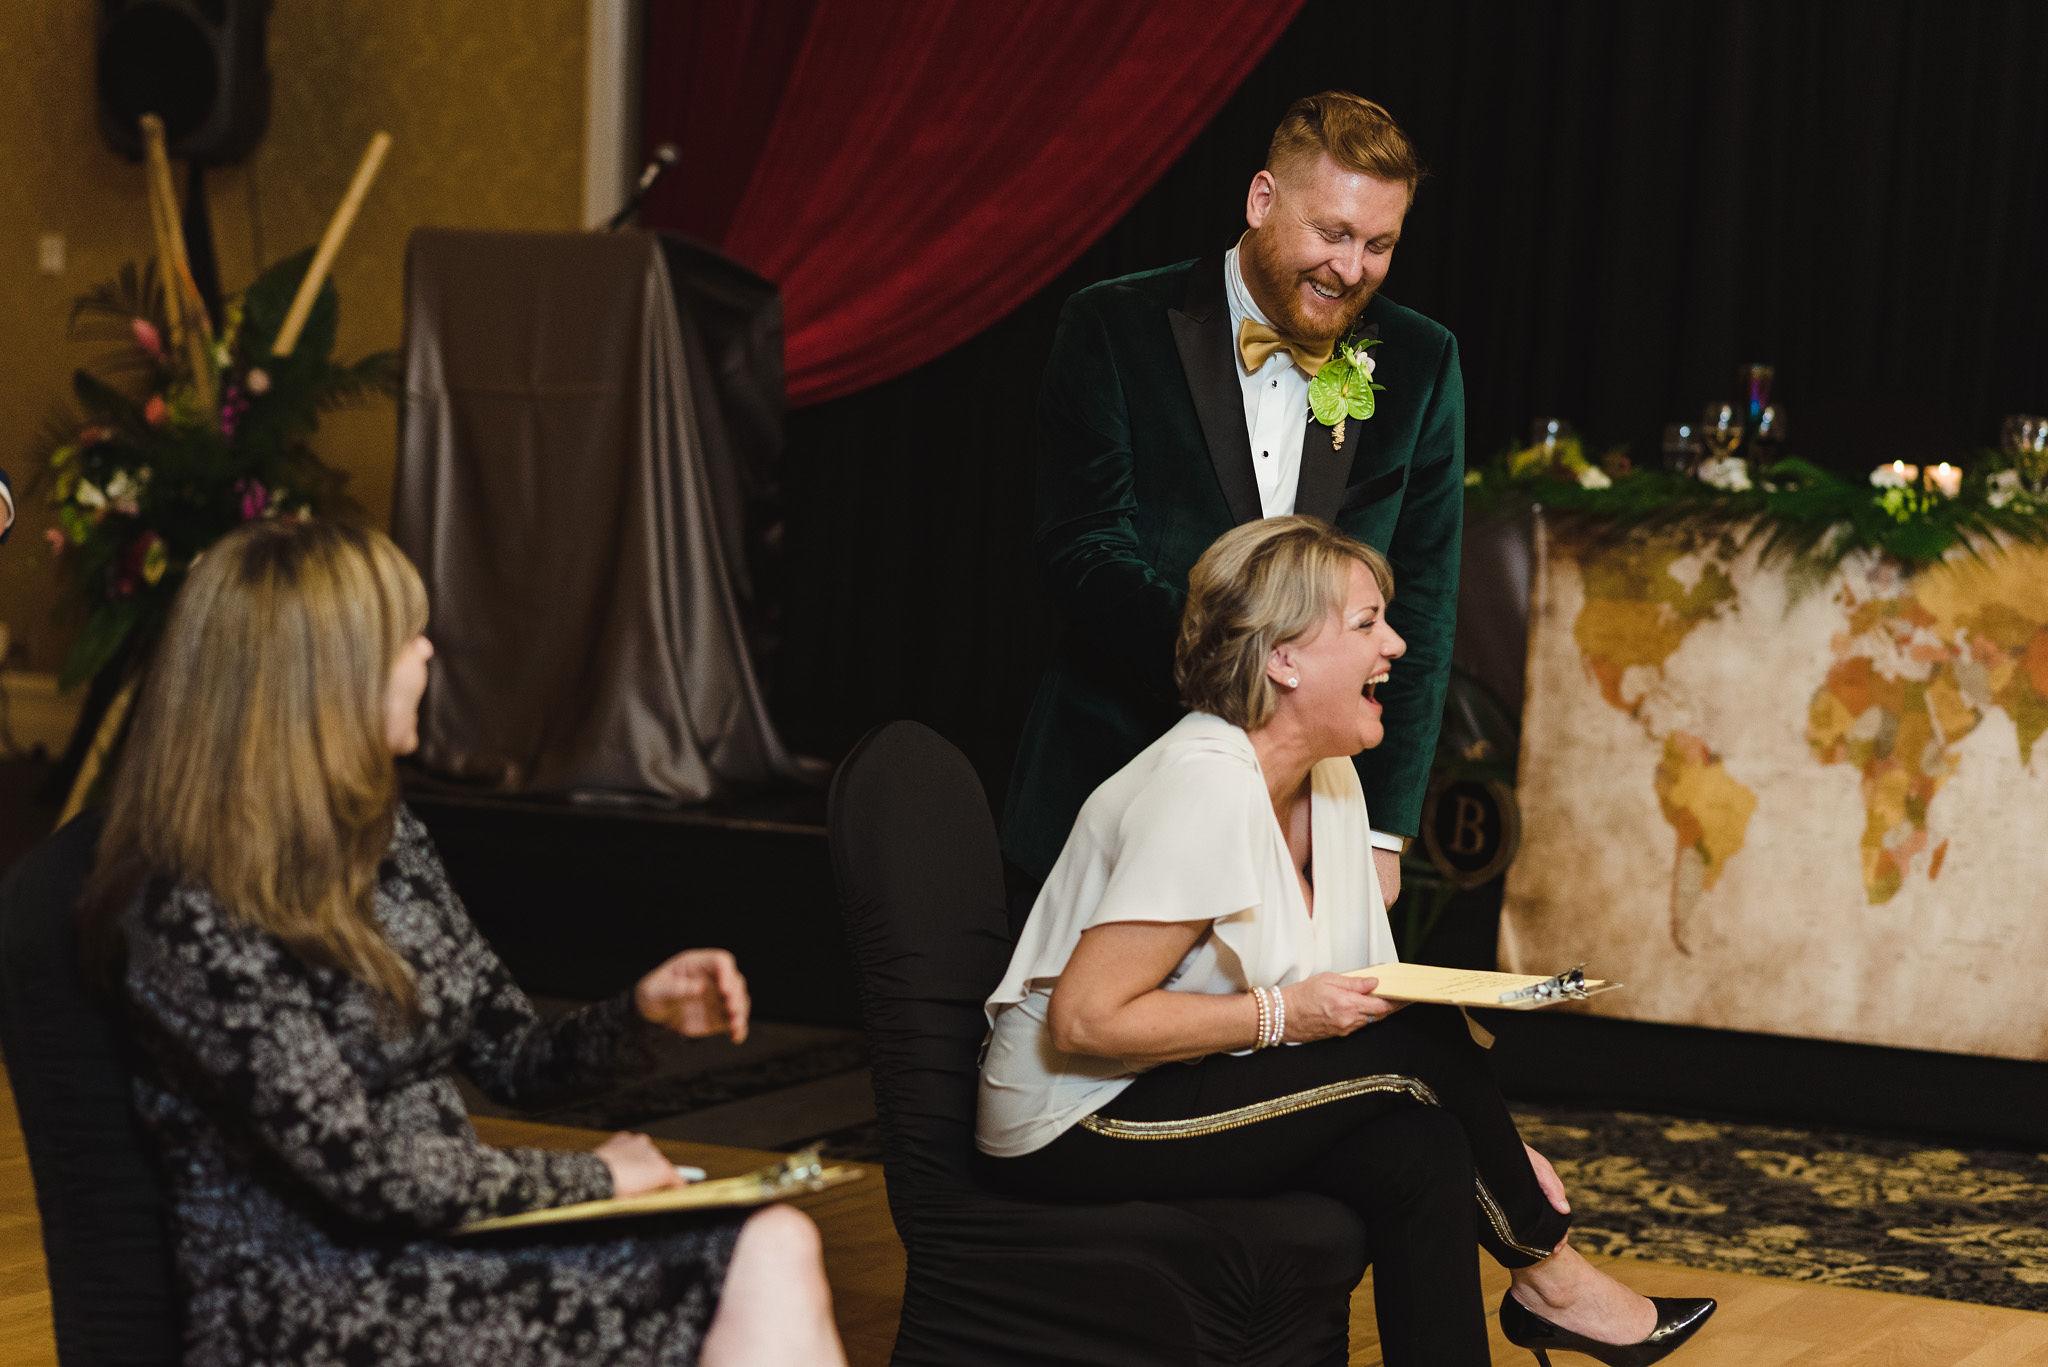 wedding guest and groom laughing during a fun wedding game for the reception at the Hilton Fallsview in Niagara Falls